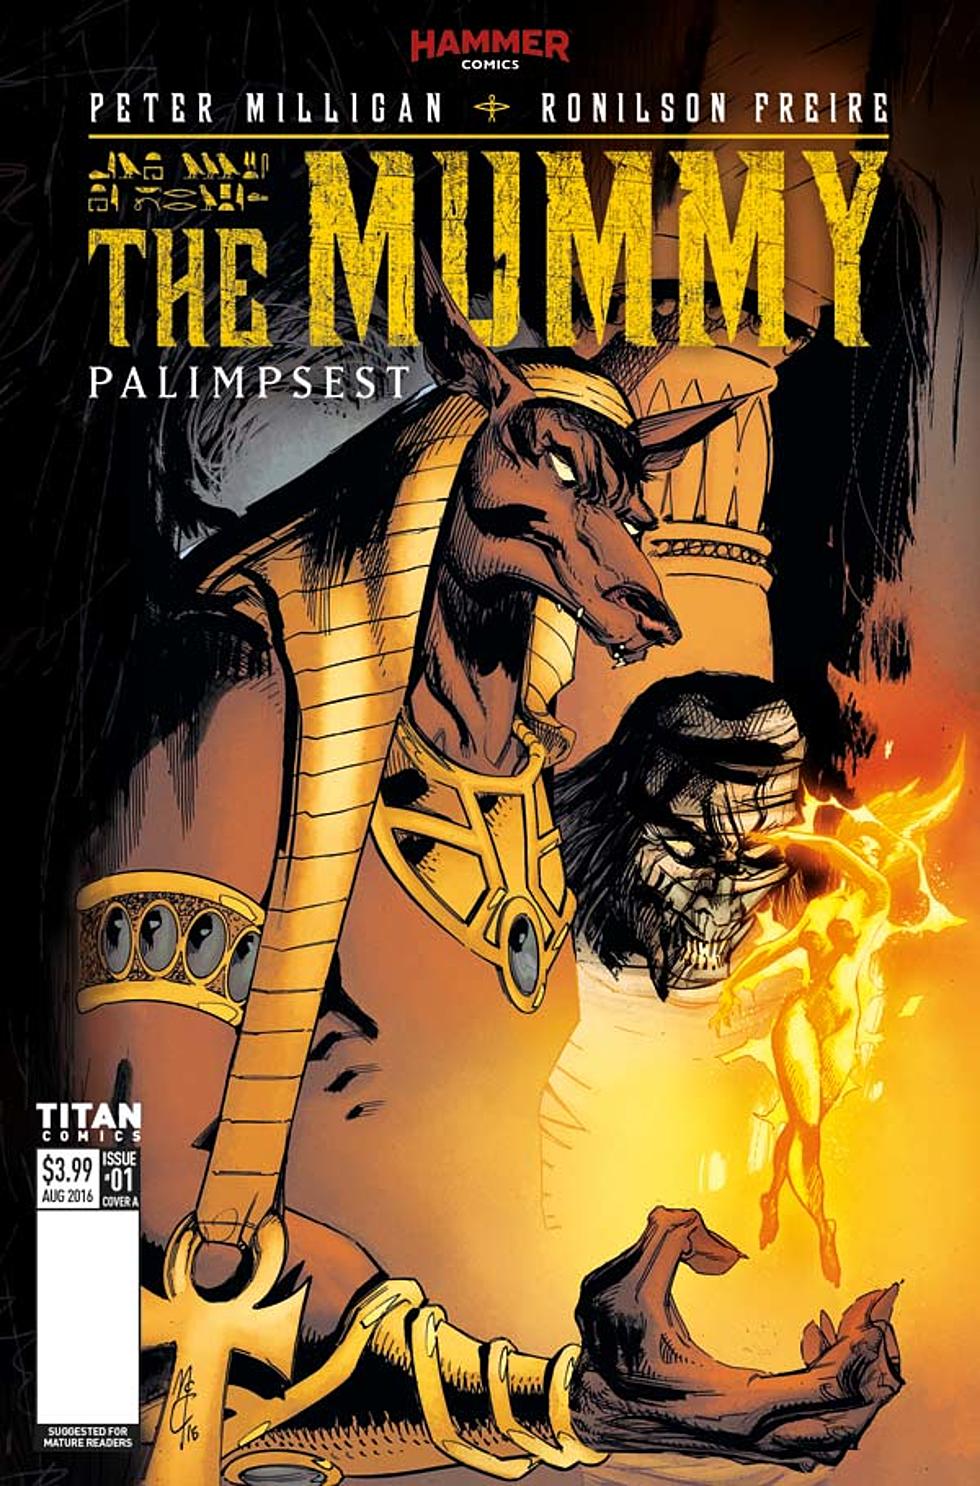 The Gods Can&#8217;t Be Trusted In Hammer&#8217;s &#8216;The Mummy&#8217; #1 [Preview]